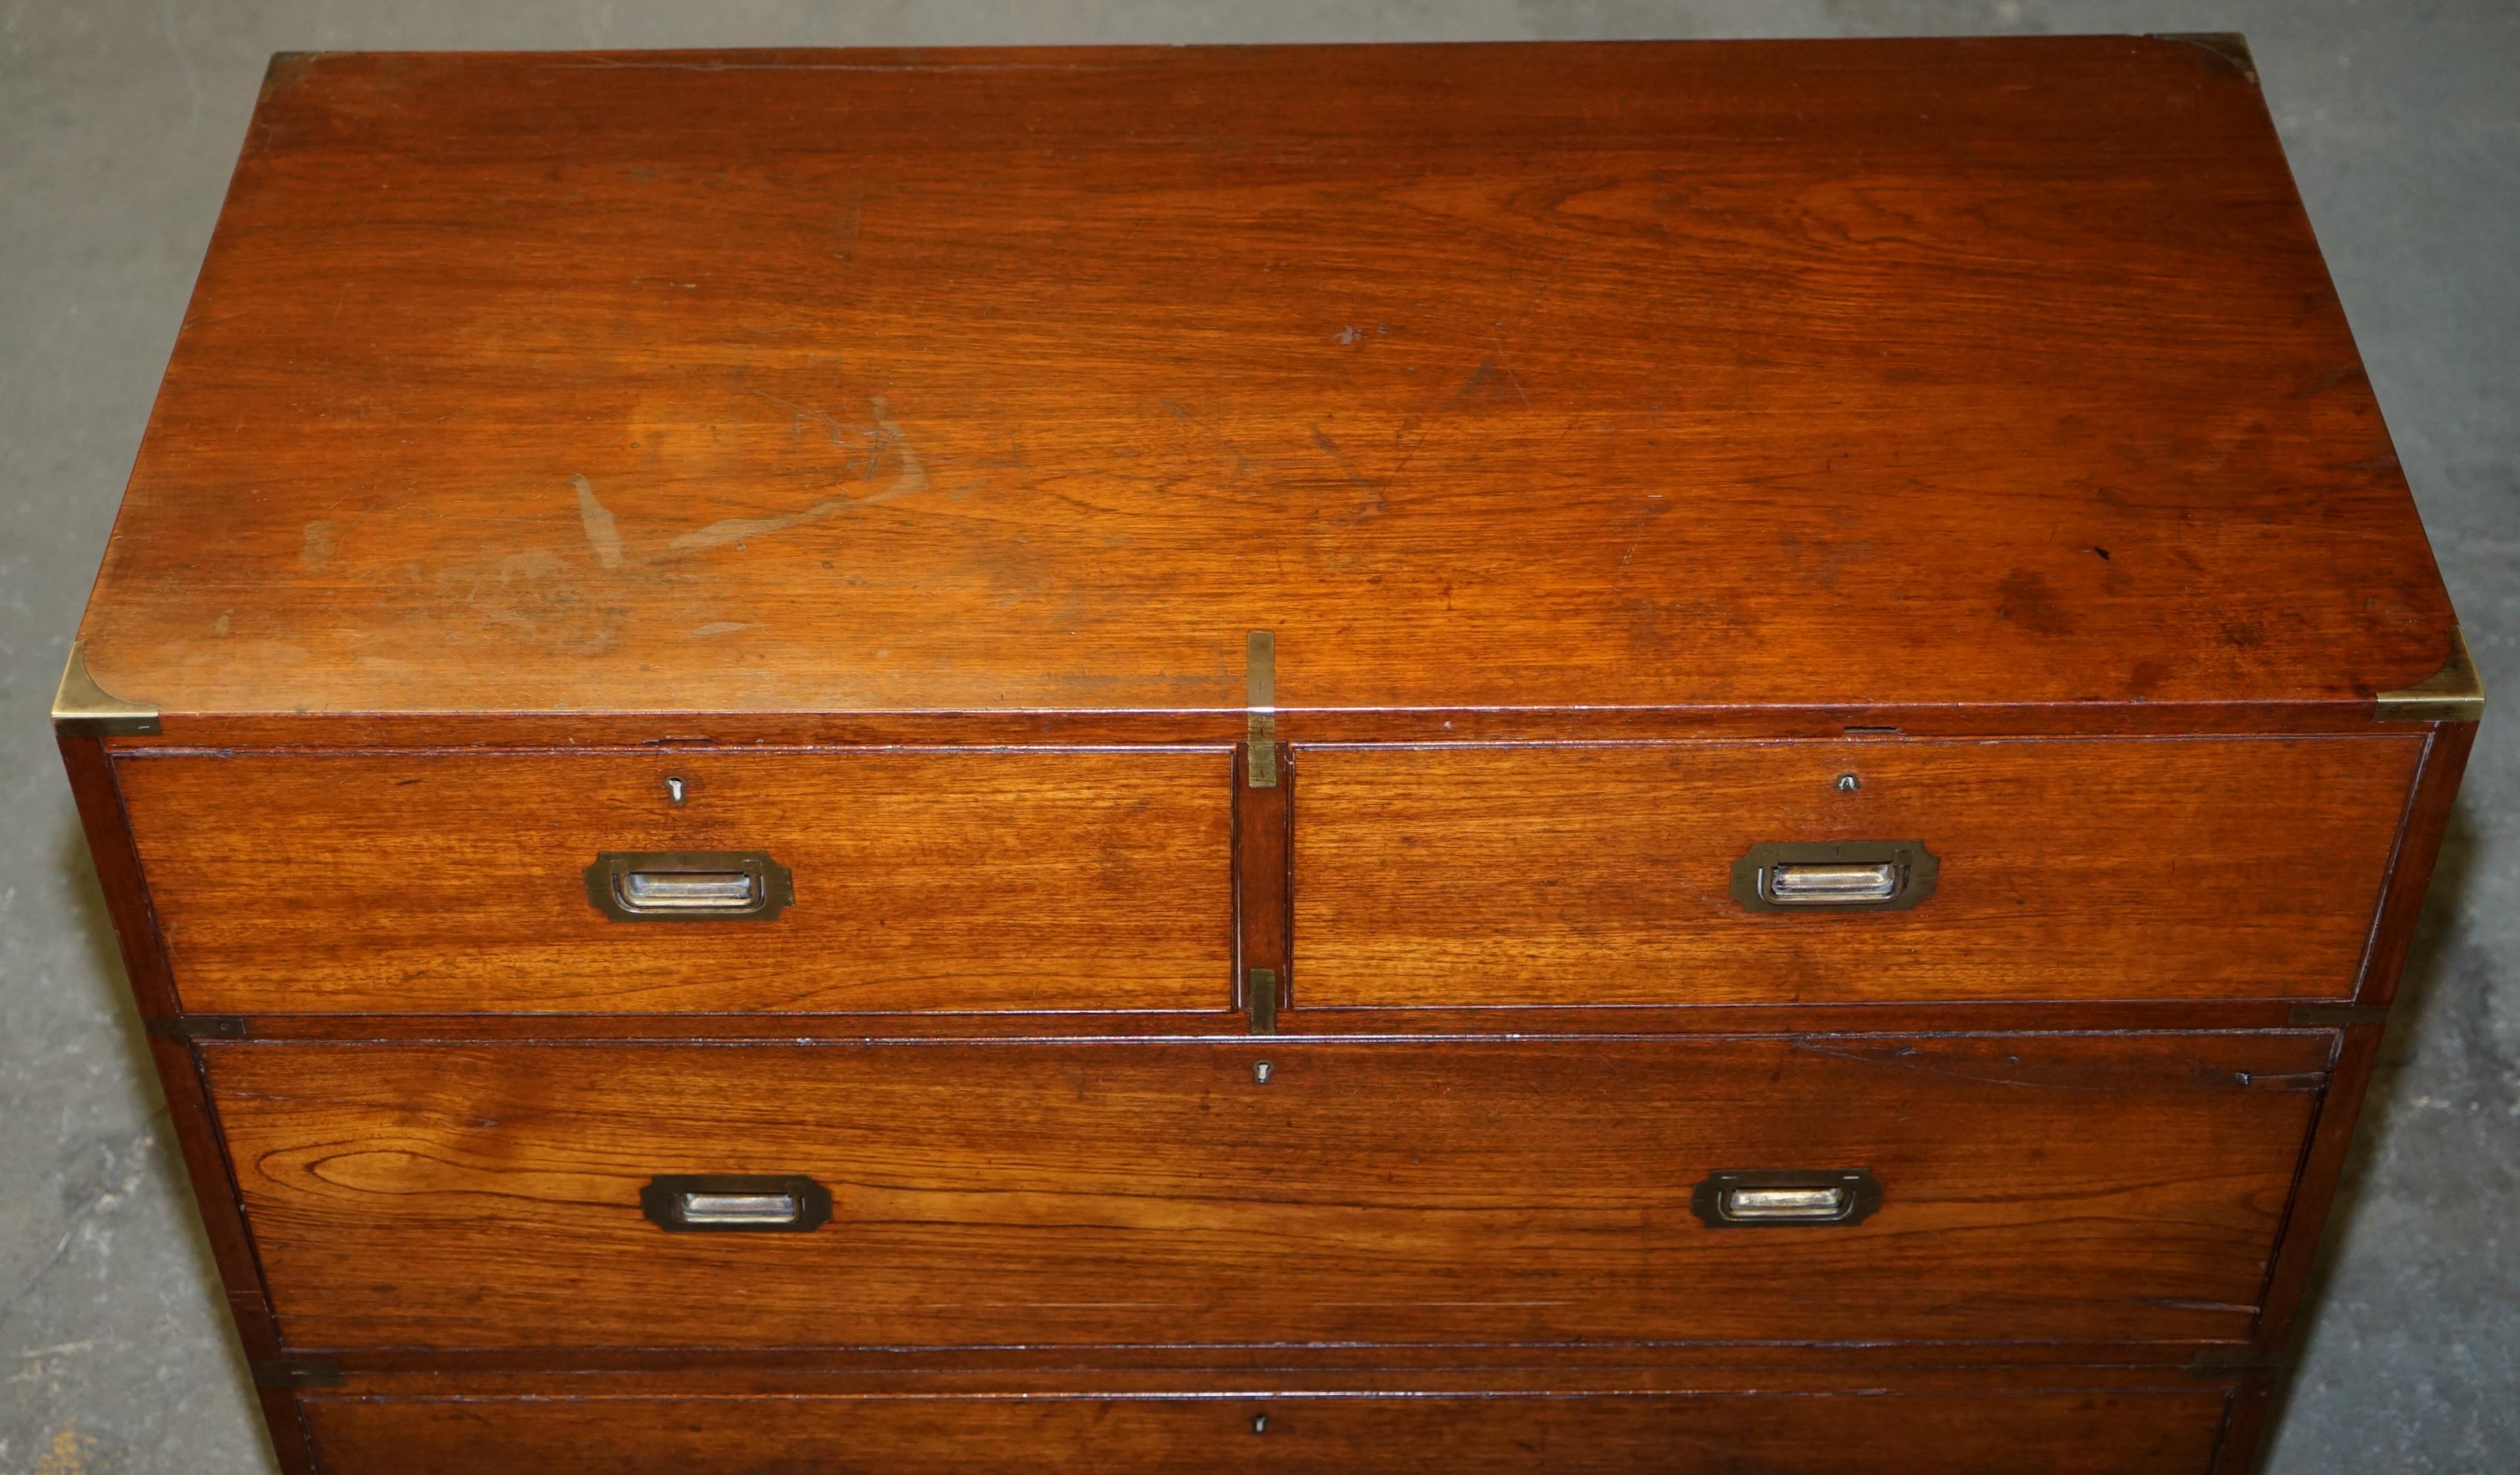 Hand-Crafted Original circa 1900 Army & Navy C.S.L Stamped Military Campaign Chest of Drawers